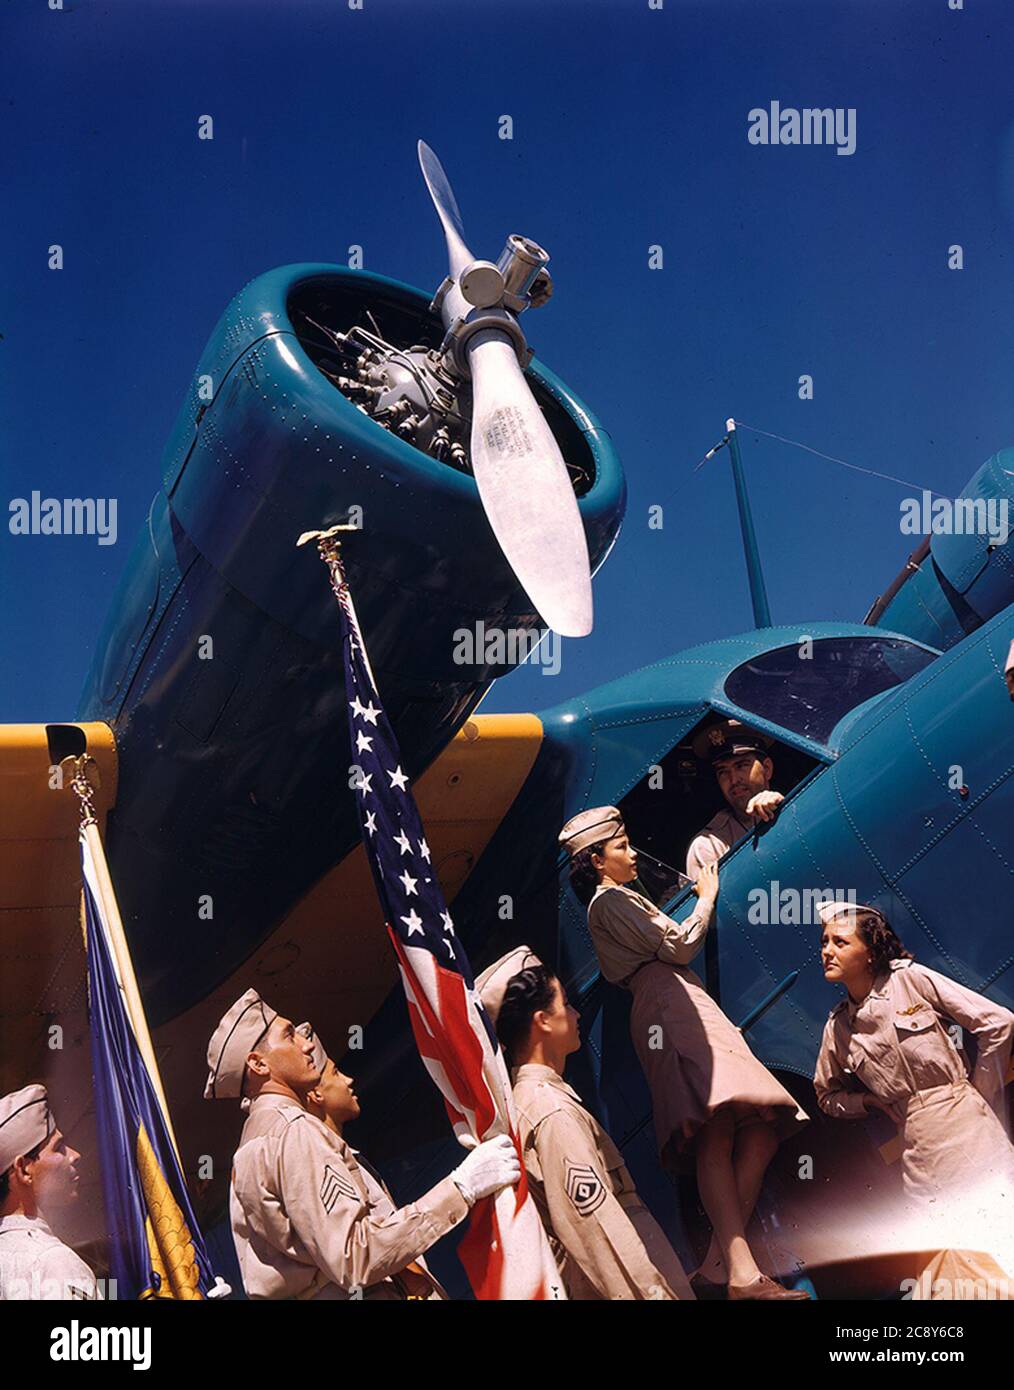 Grumman Goose High Resolution Stock Photography And Images Alamy